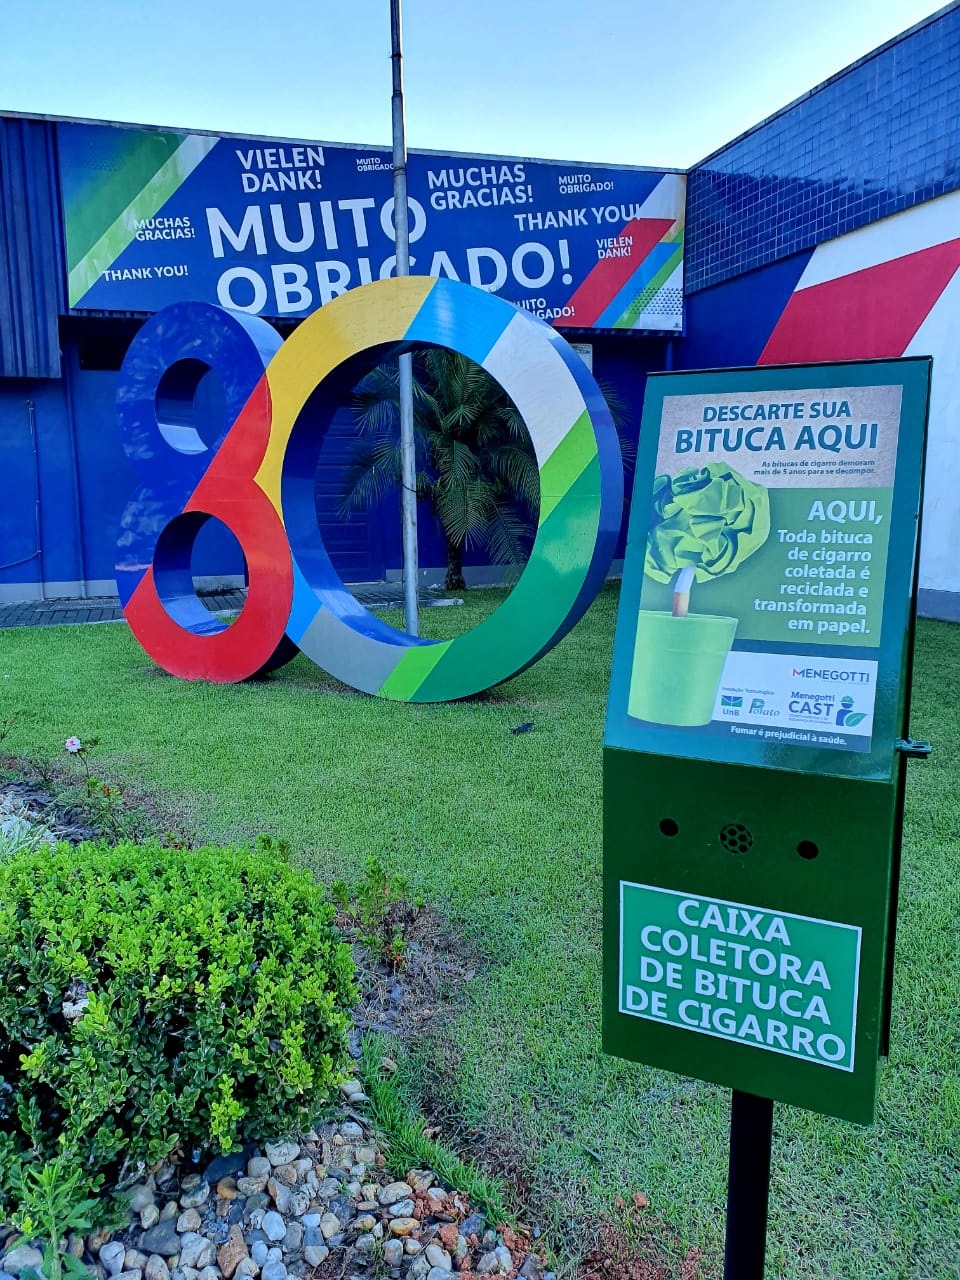 MENEGOTTI GROUP IS PIONEER IN THE STATE OF SANTA CATARINA (SOUTH BRAZIL) IN COLLETCT CIGARETTE BUTTS FROM THE FLOOR OF OUR UNITS AND SURROUNDINGS FOR RECYCLING.